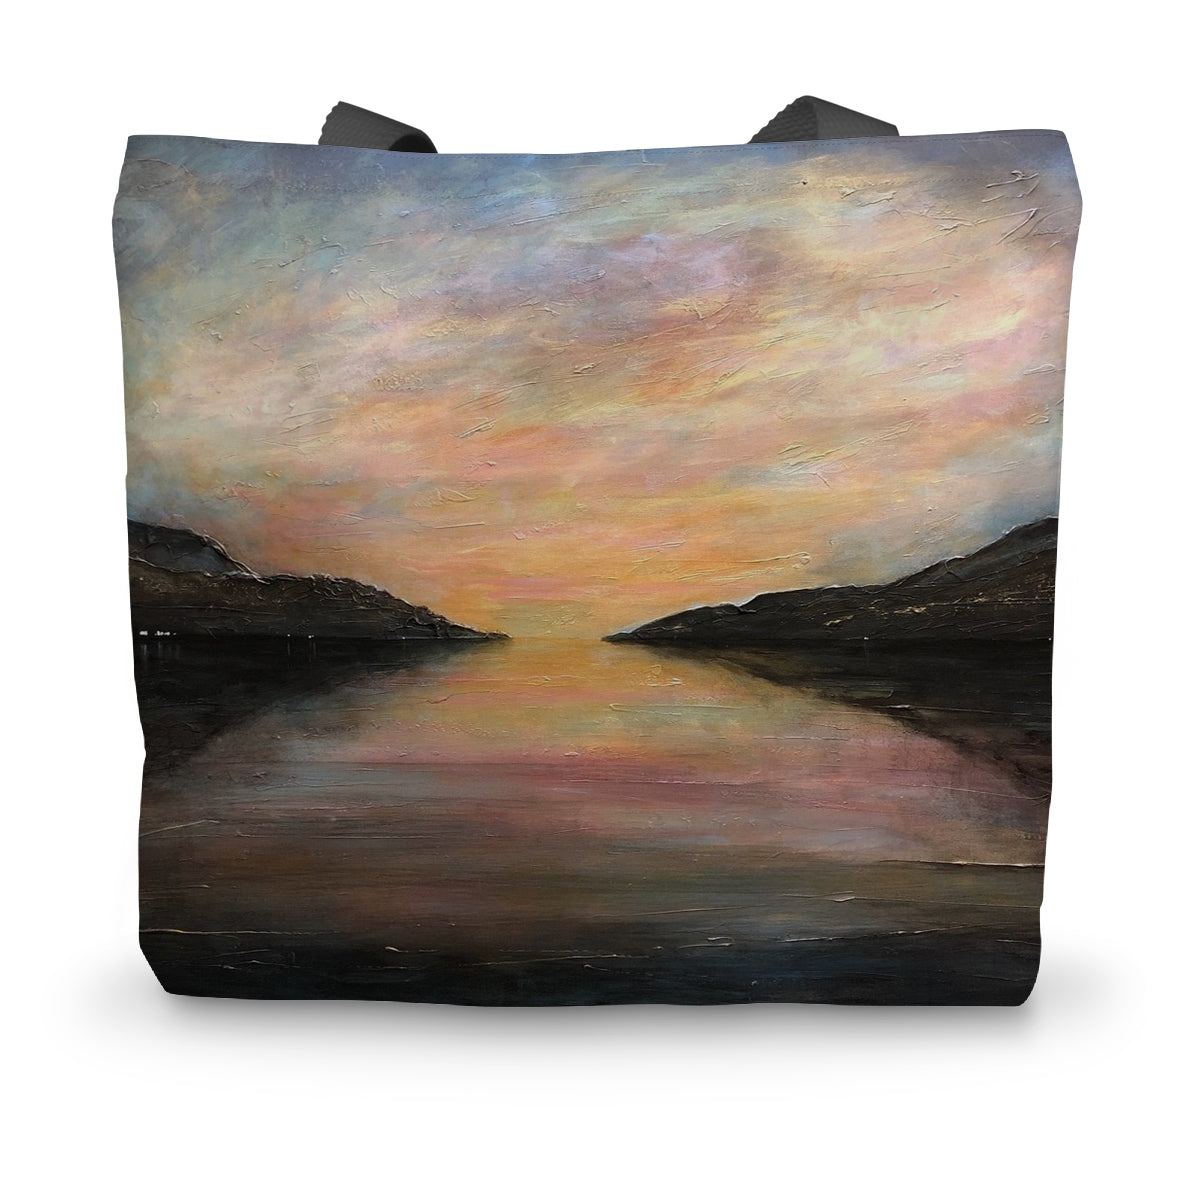 Loch Ness Glow Art Gifts Canvas Tote Bag-Bags-Scottish Lochs & Mountains Art Gallery-14"x18.5"-Paintings, Prints, Homeware, Art Gifts From Scotland By Scottish Artist Kevin Hunter